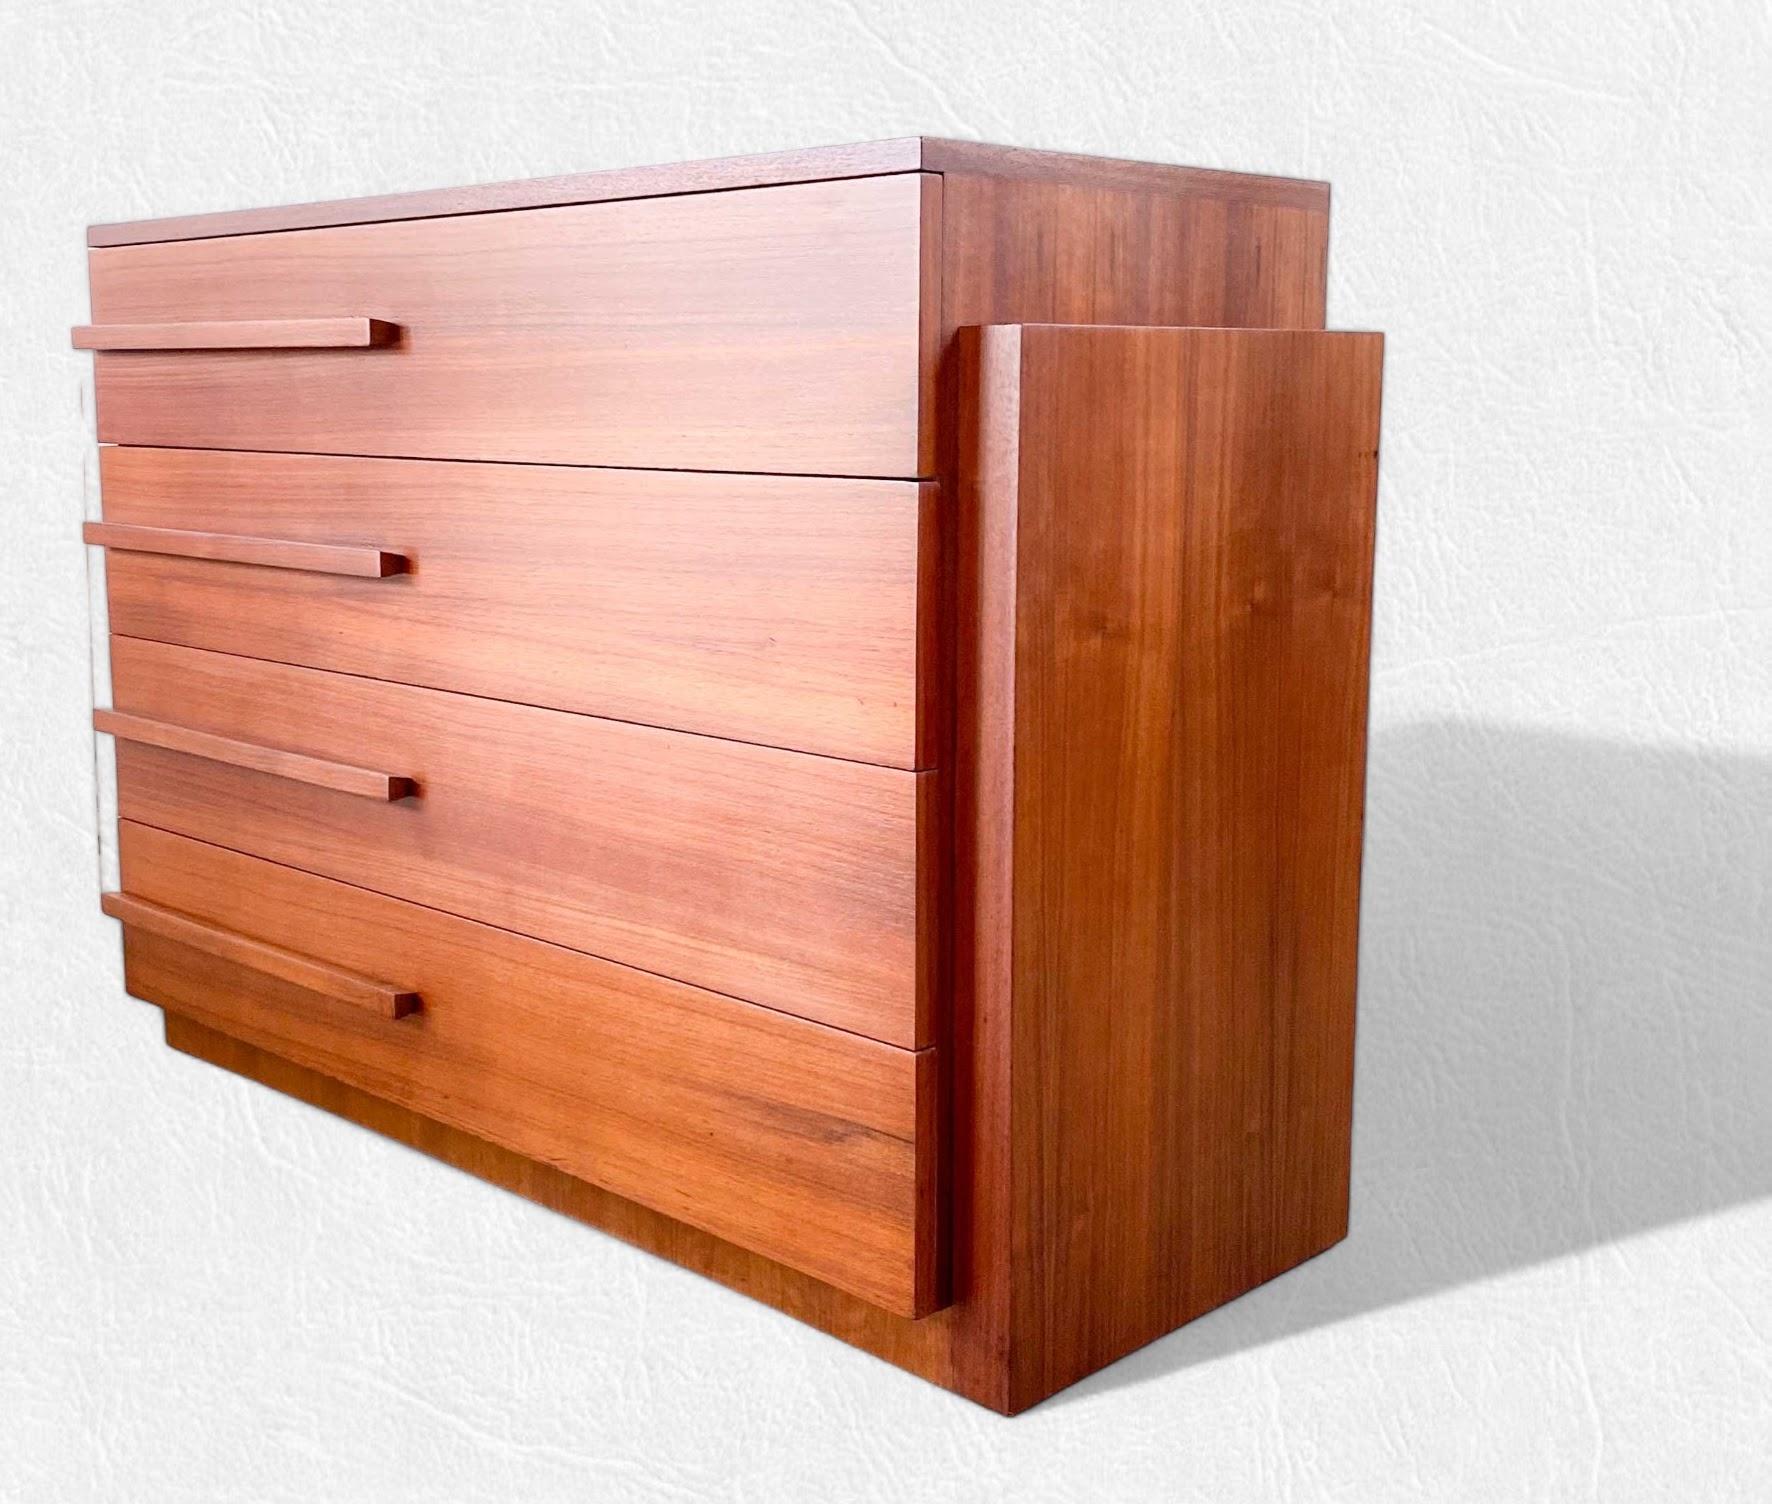 Hand-Crafted American Art Deco Streamline Mahogany Dresser by Modernage, N.Y., 1930s For Sale